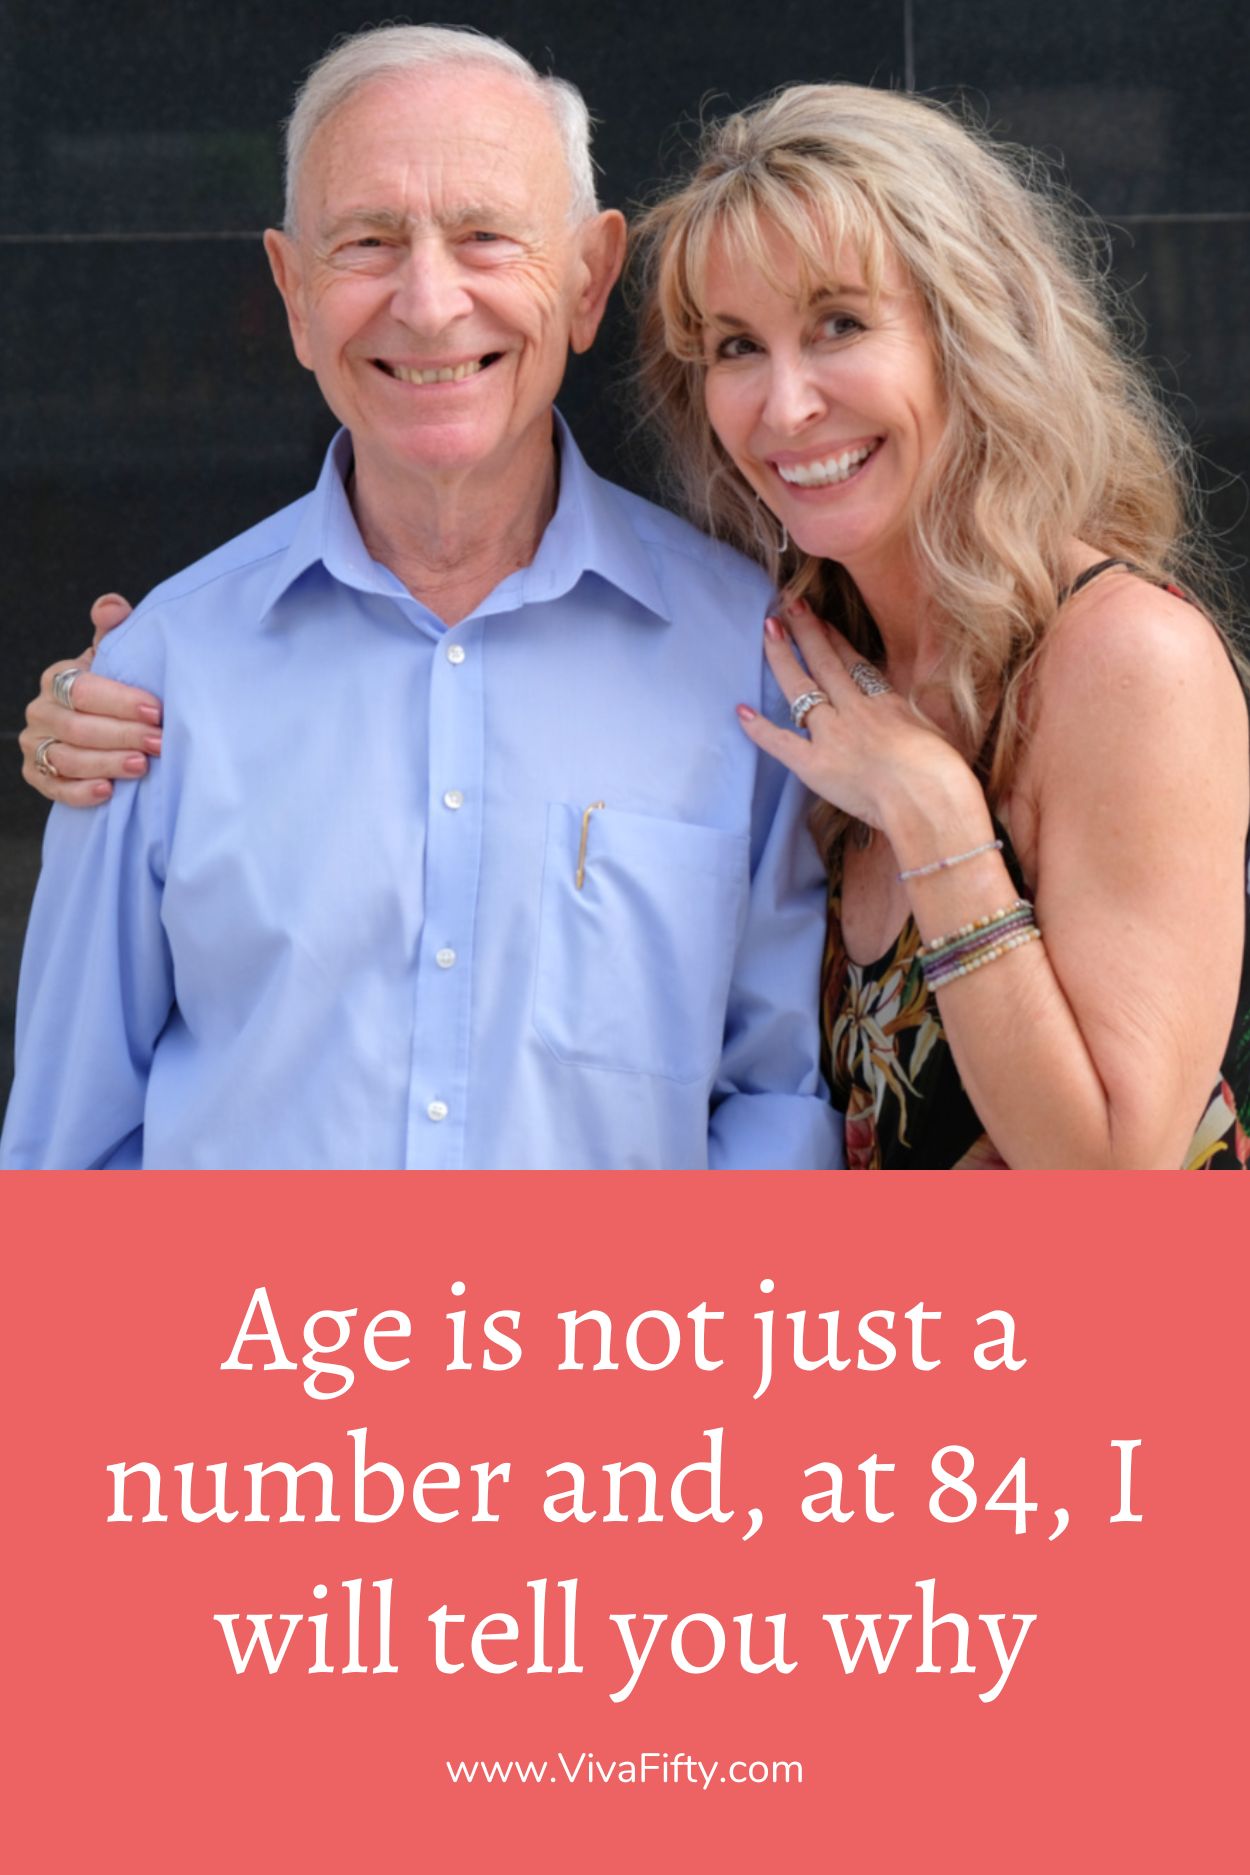 Age is more than just a number. The fact is that at 84 I do not feel physically the same as I did twenty years ago.